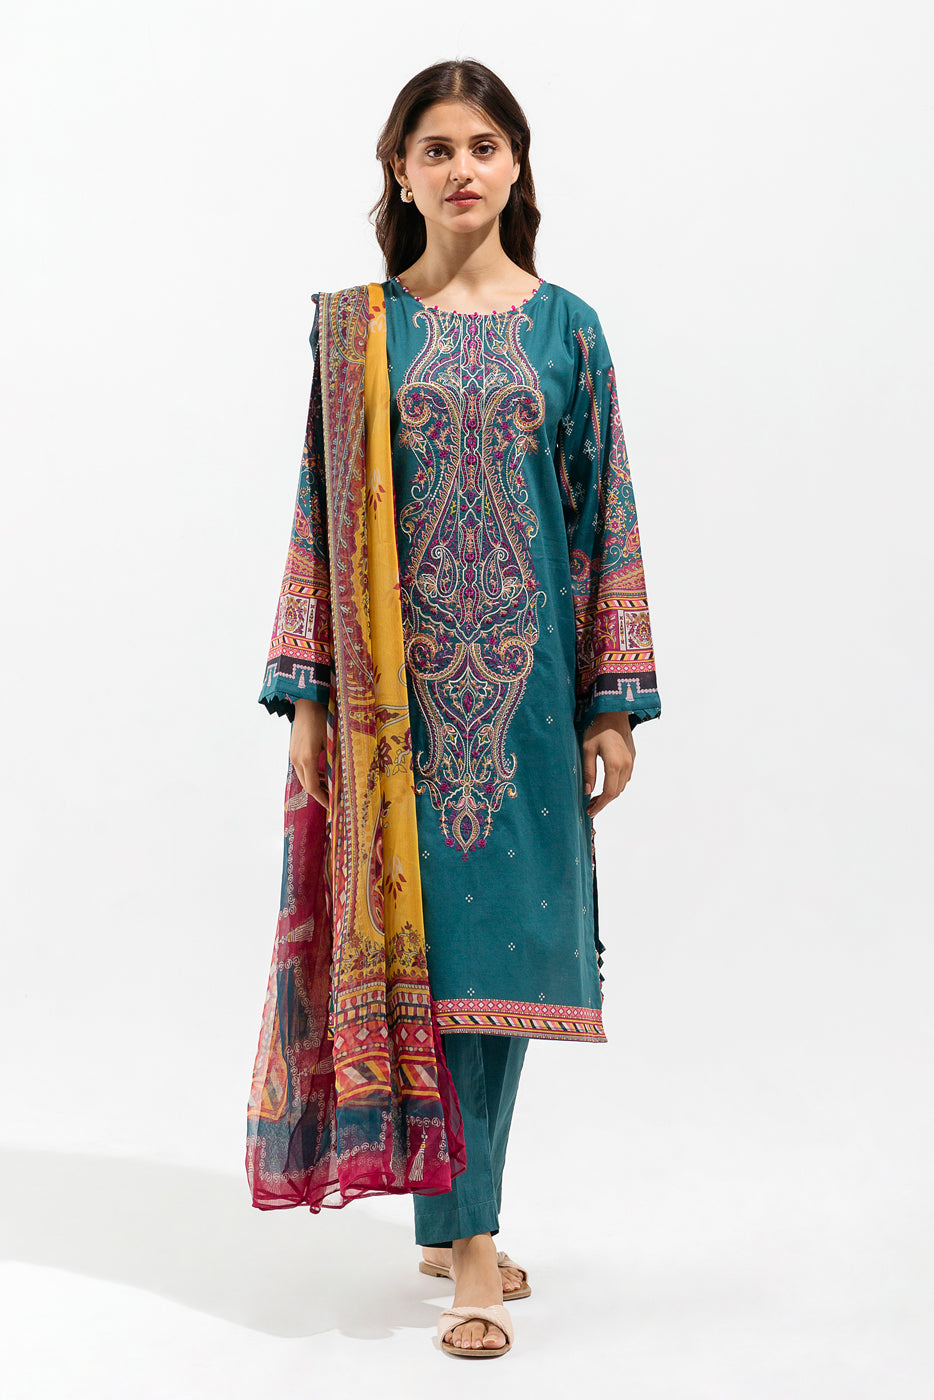 2 PIECE - EMBROIDERED LAWN SUIT - AEGEAN WILT (UNSTITCHED) - BEECHTREE